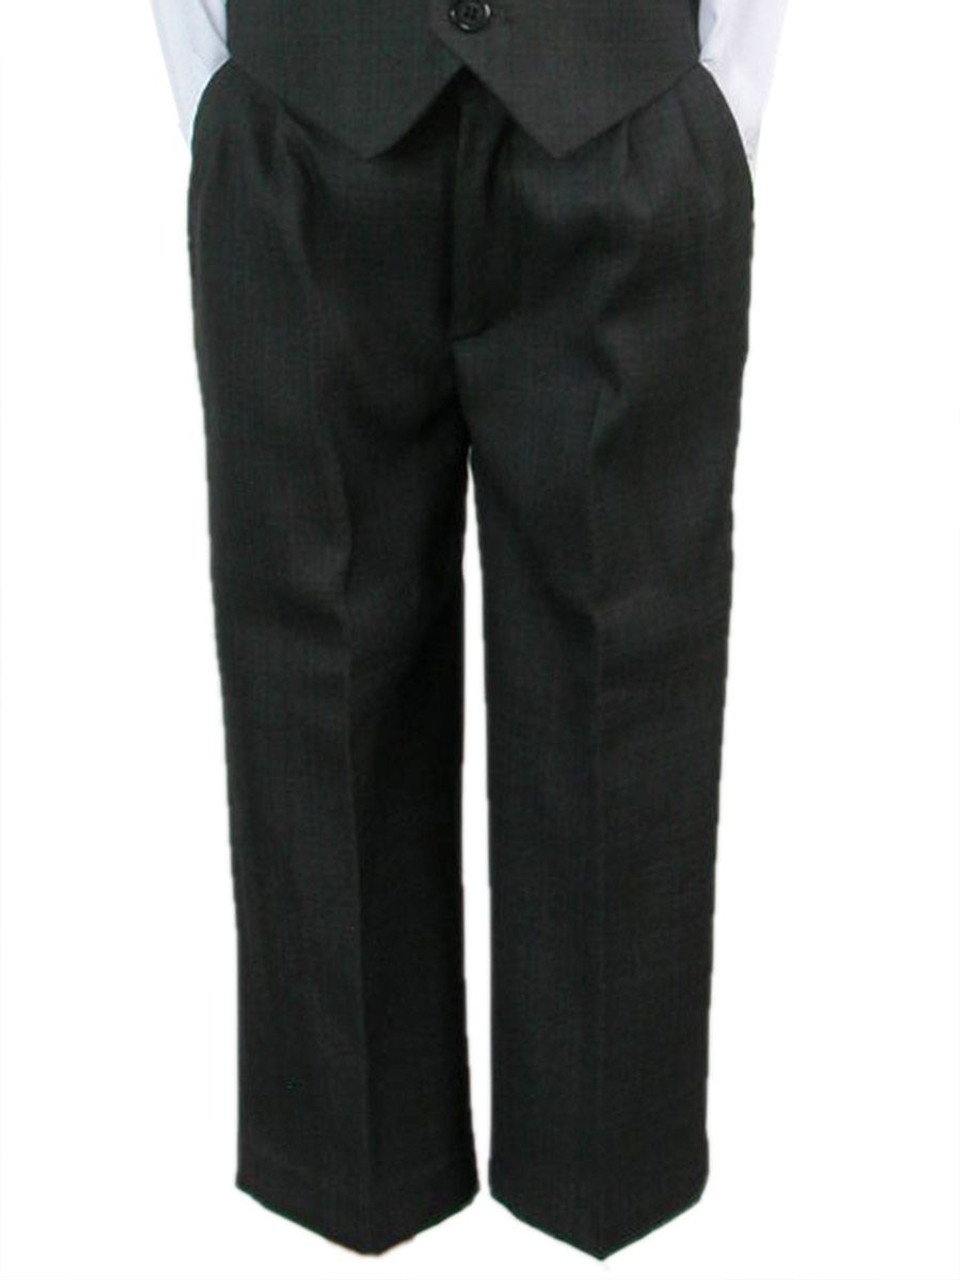 Skinny Fit Boys Flat Front Dress Pants - Double Header USA